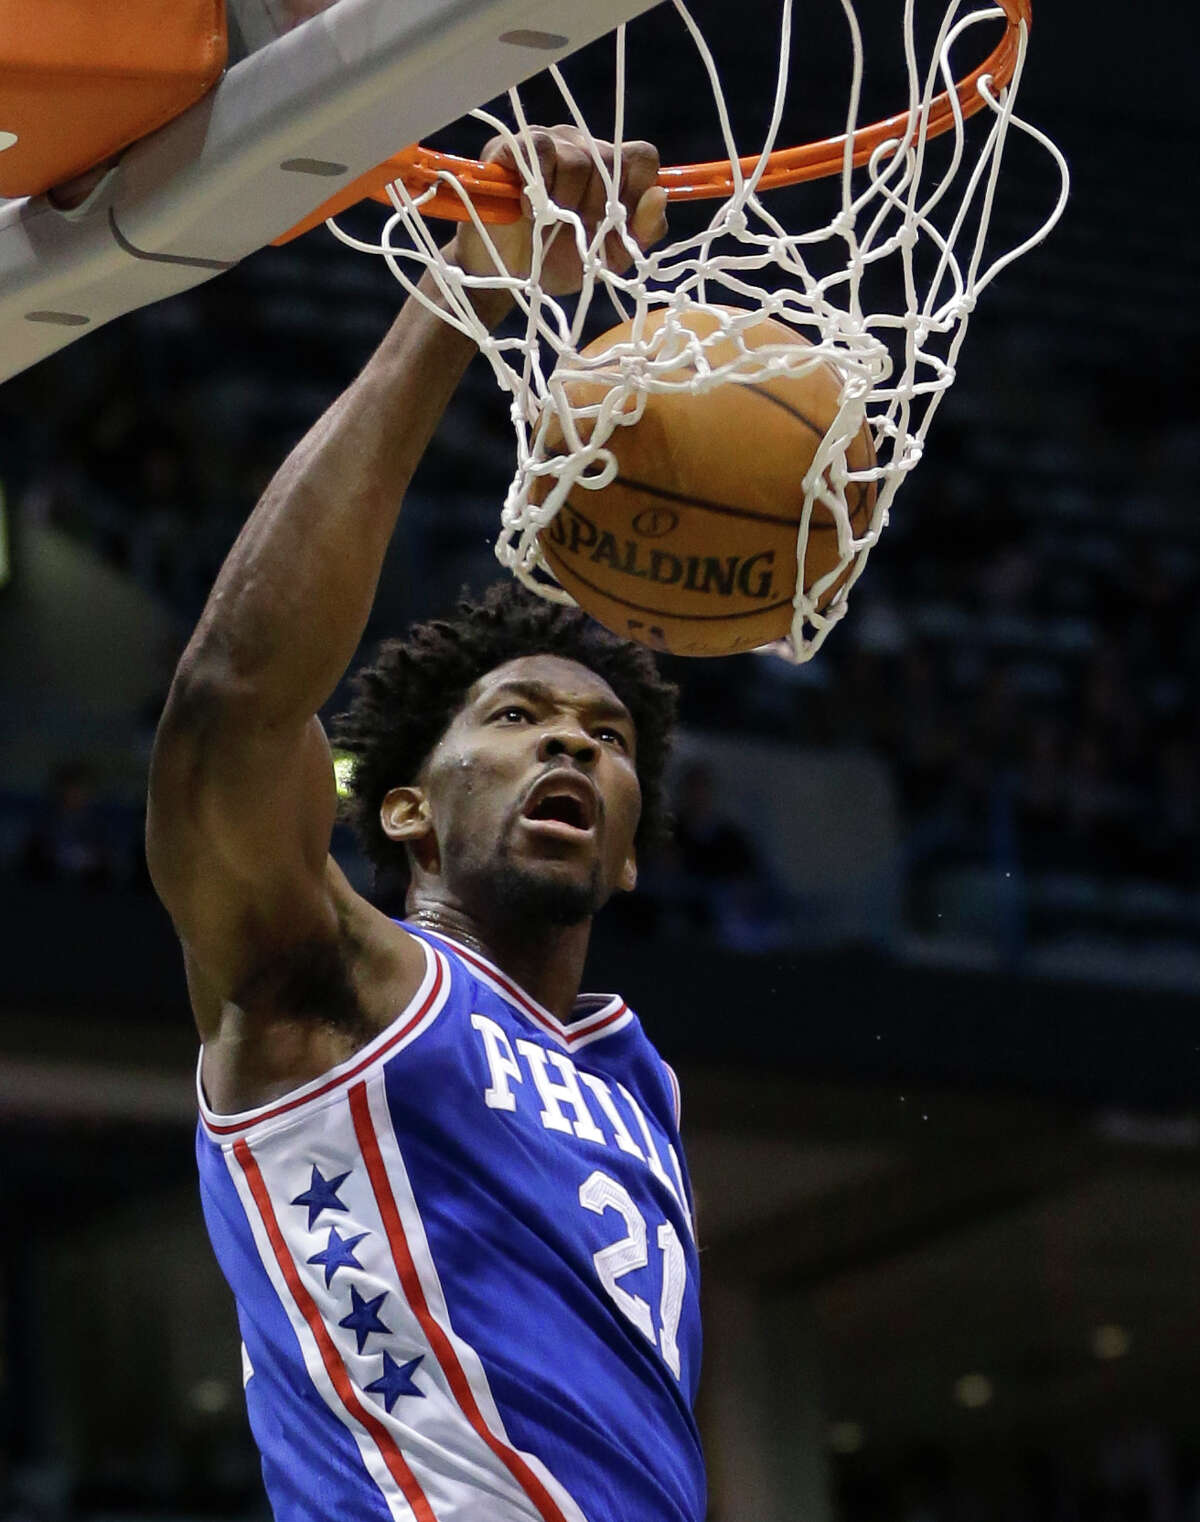 Spurs won't have to worry about Sixers star Joel Embiid